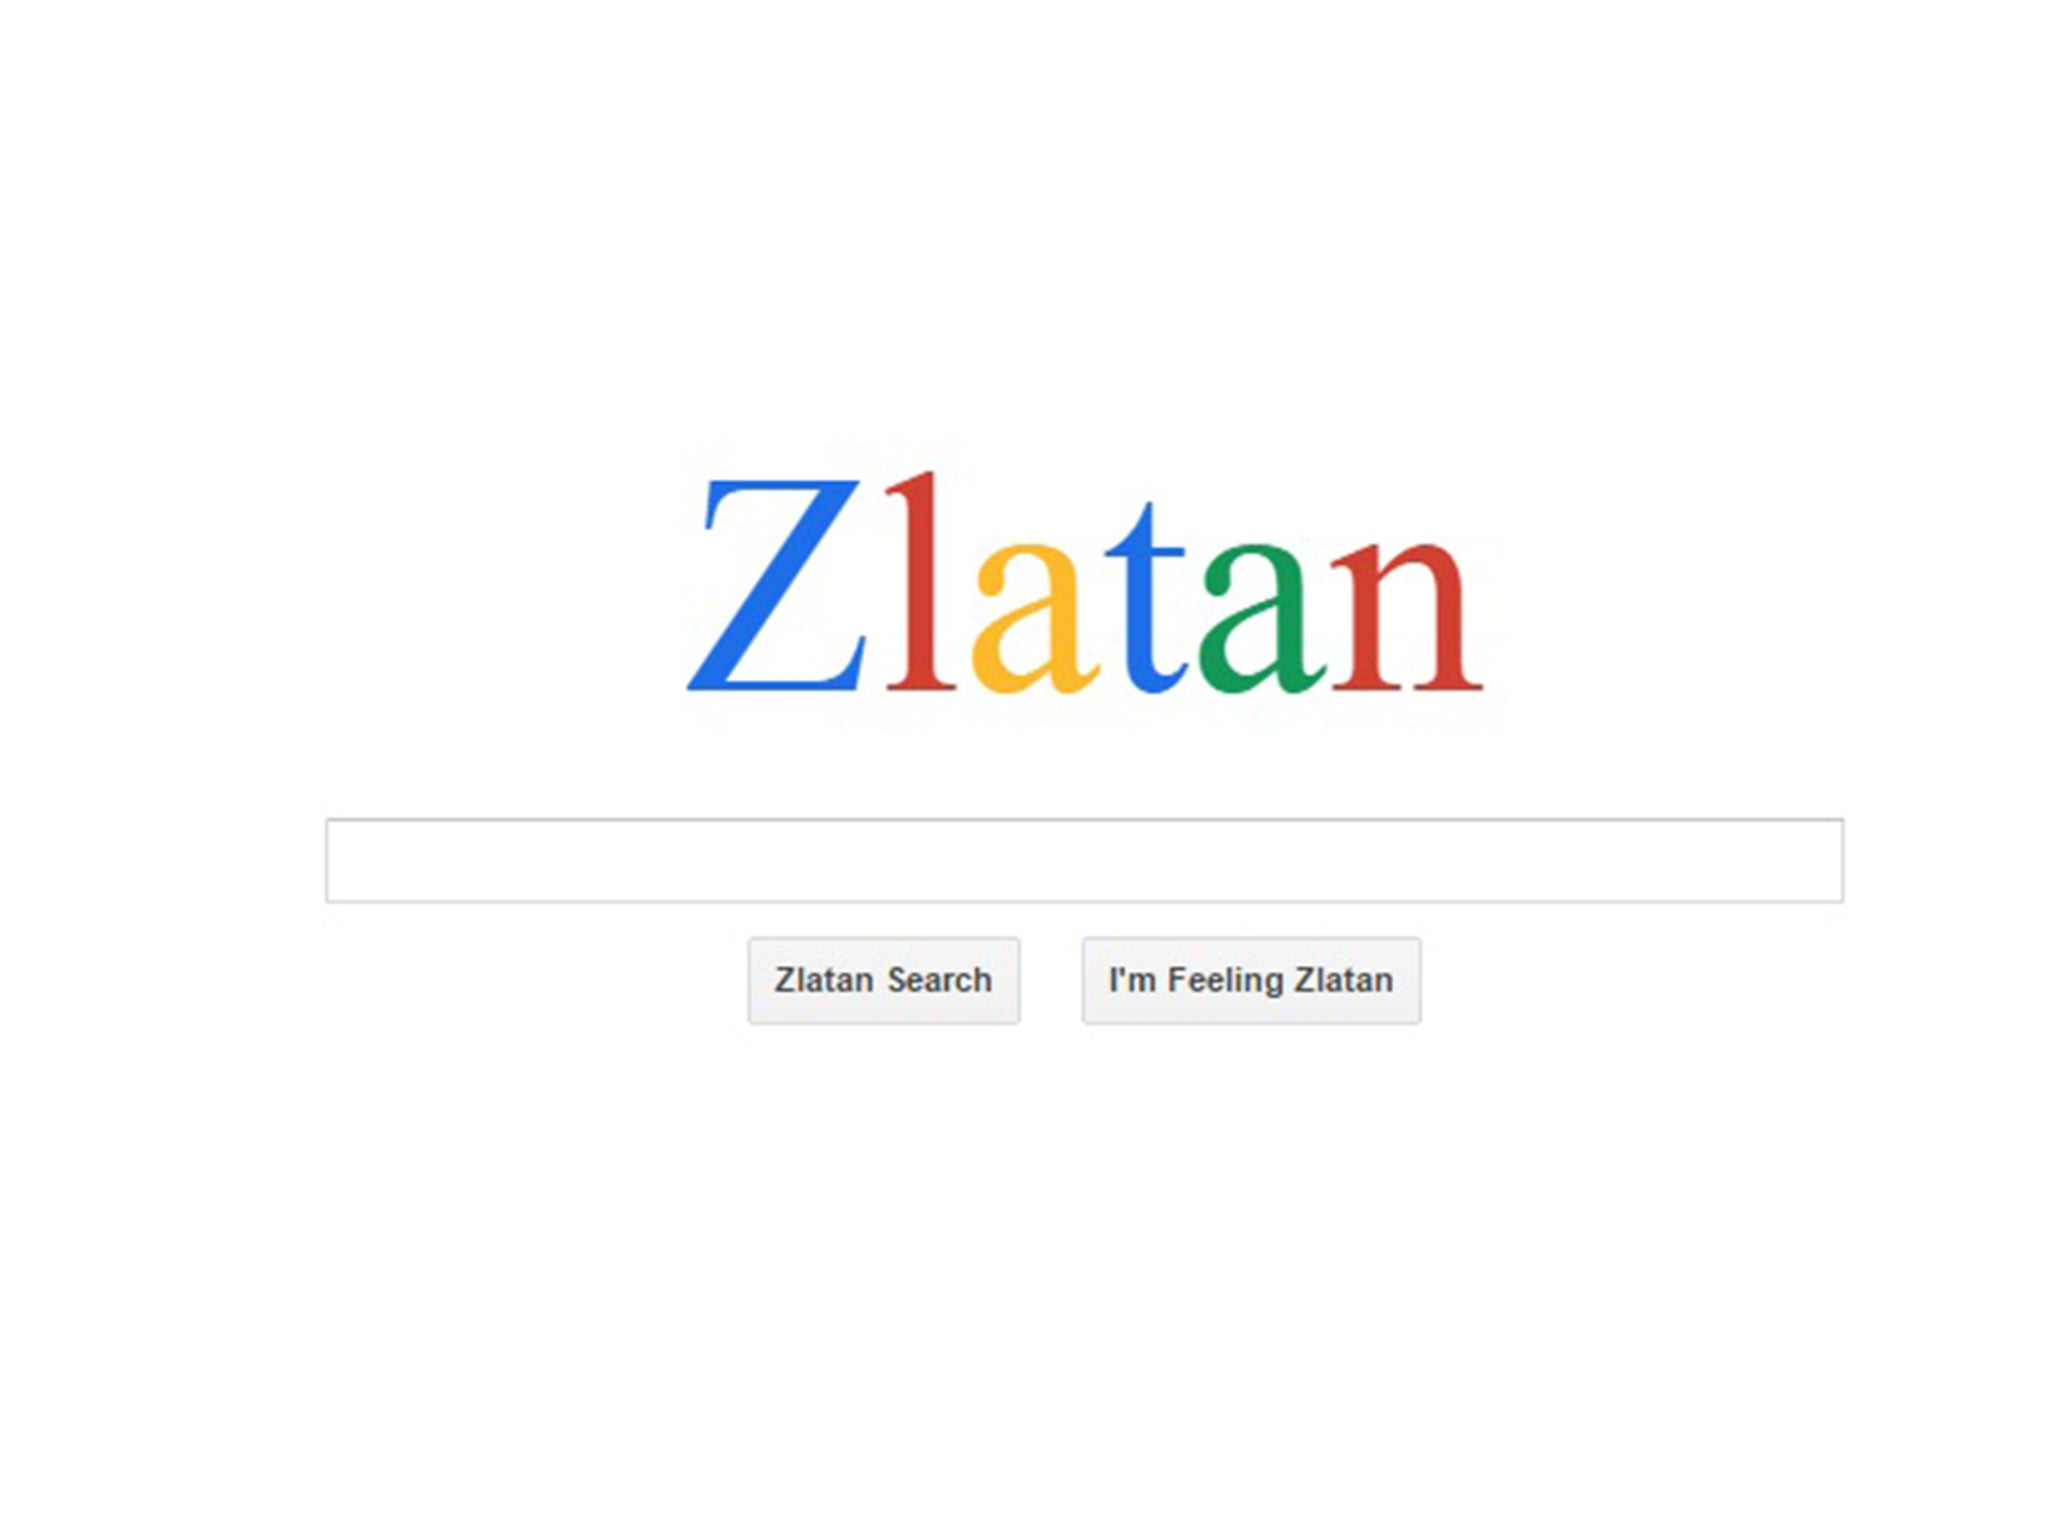 The home page of Zlaatan.com